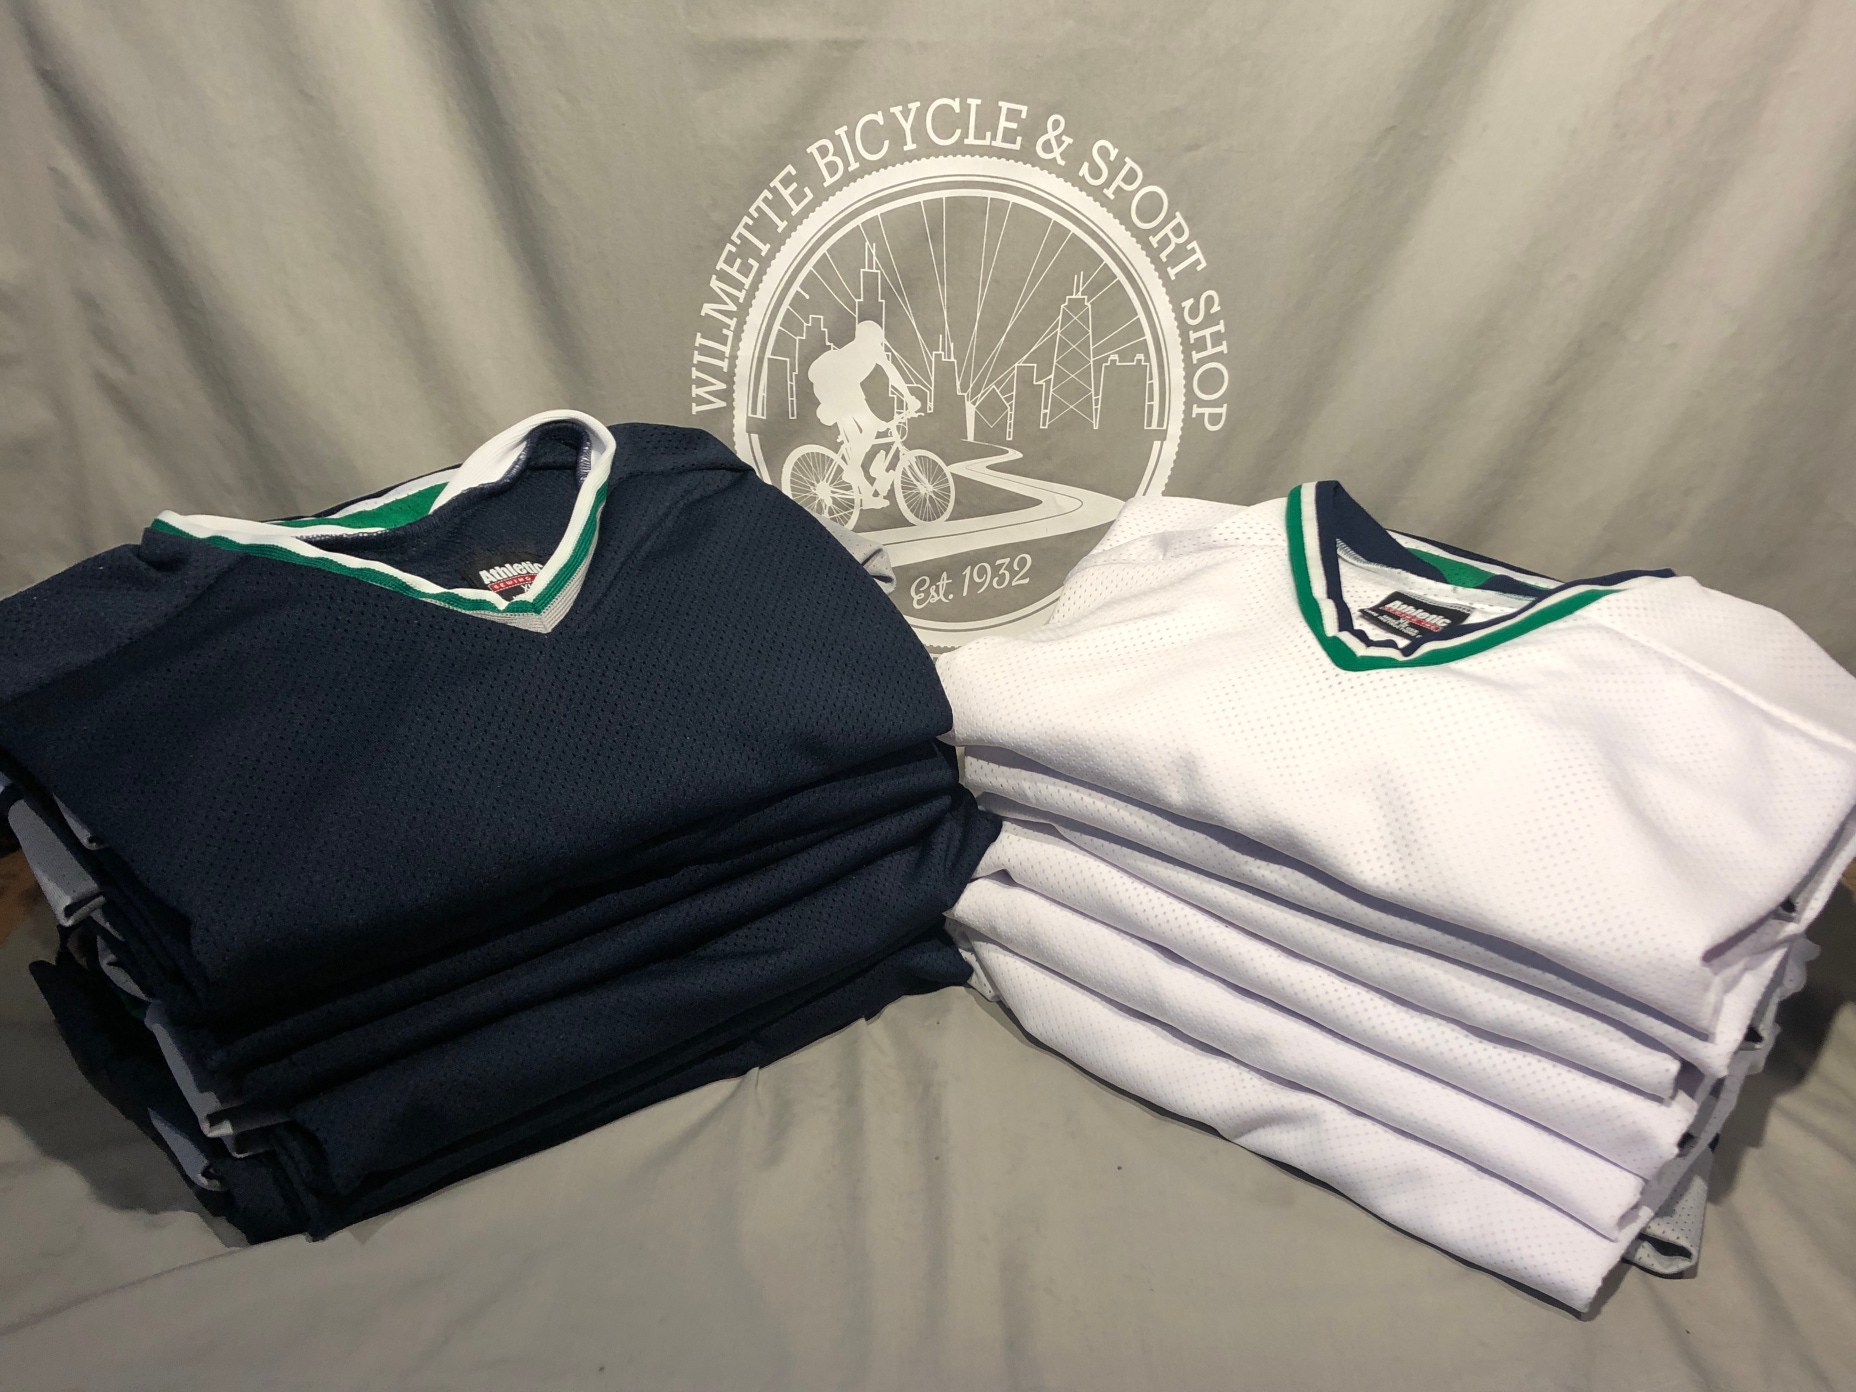 New Blank Whalers Jerseys - Home & Away